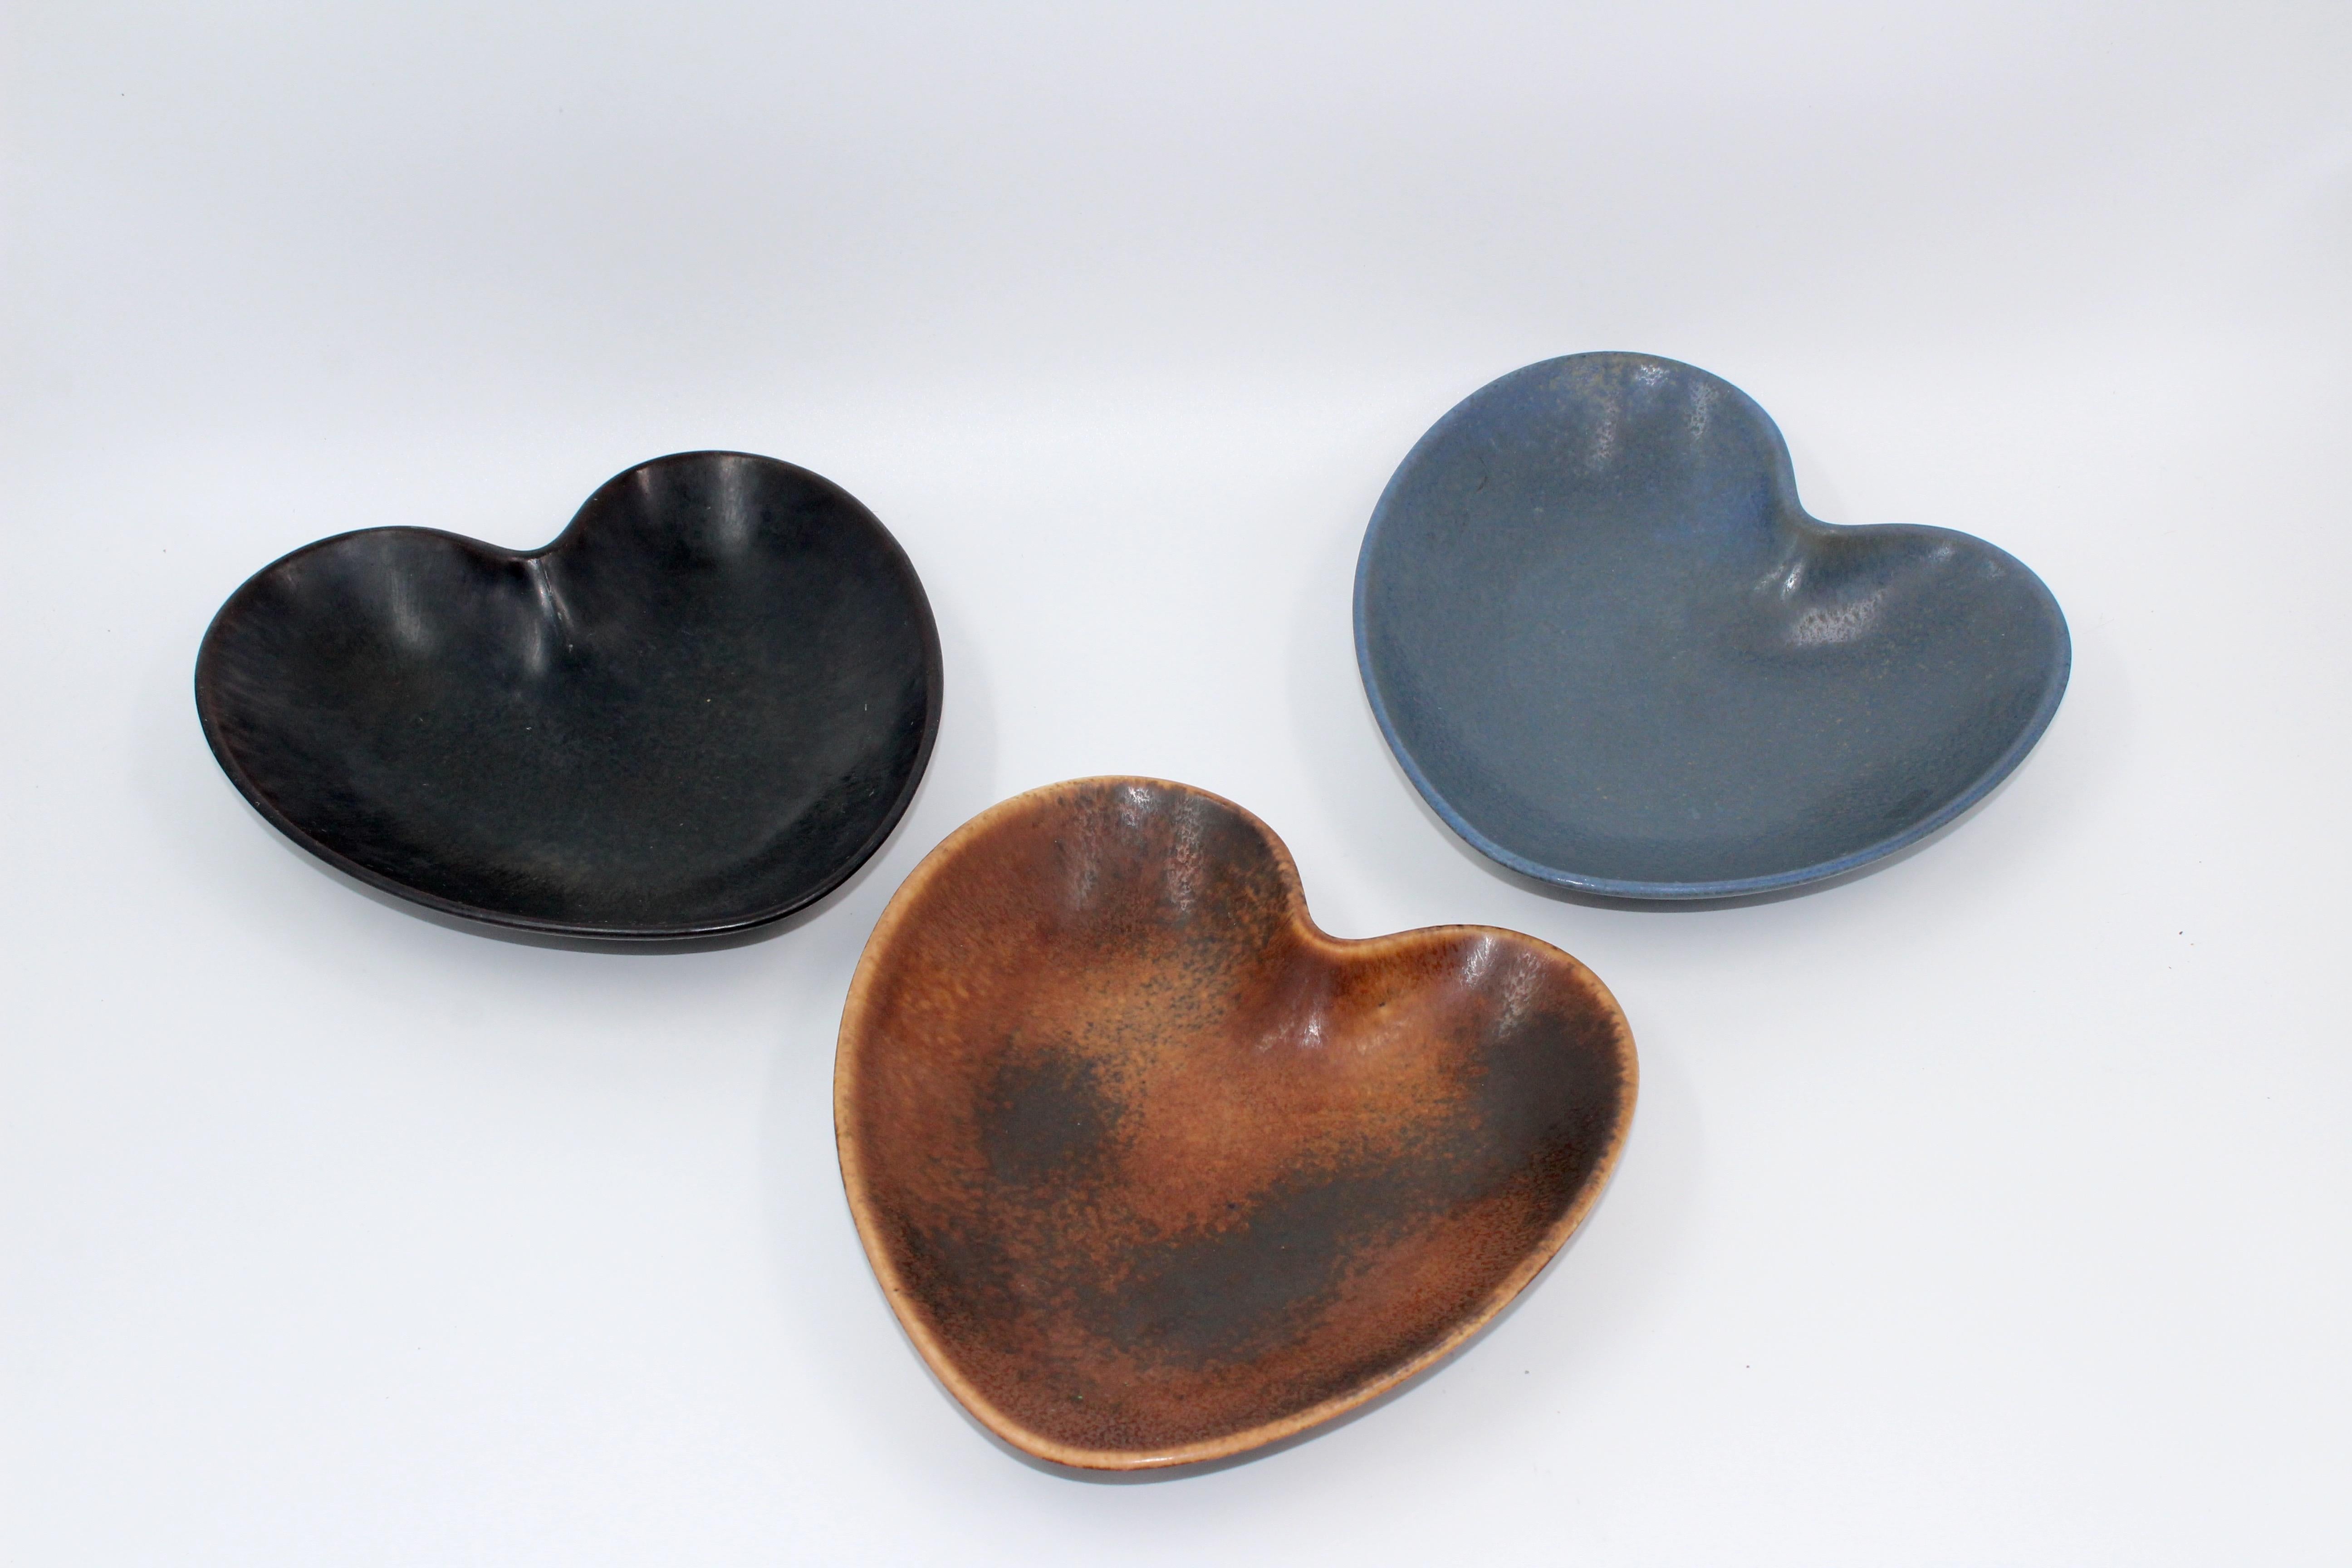 Scandinavian Modern Midcentury Heart-Shaped Ceramic Bowls by Gunnar Nylund 'Set of 3', 1950s For Sale